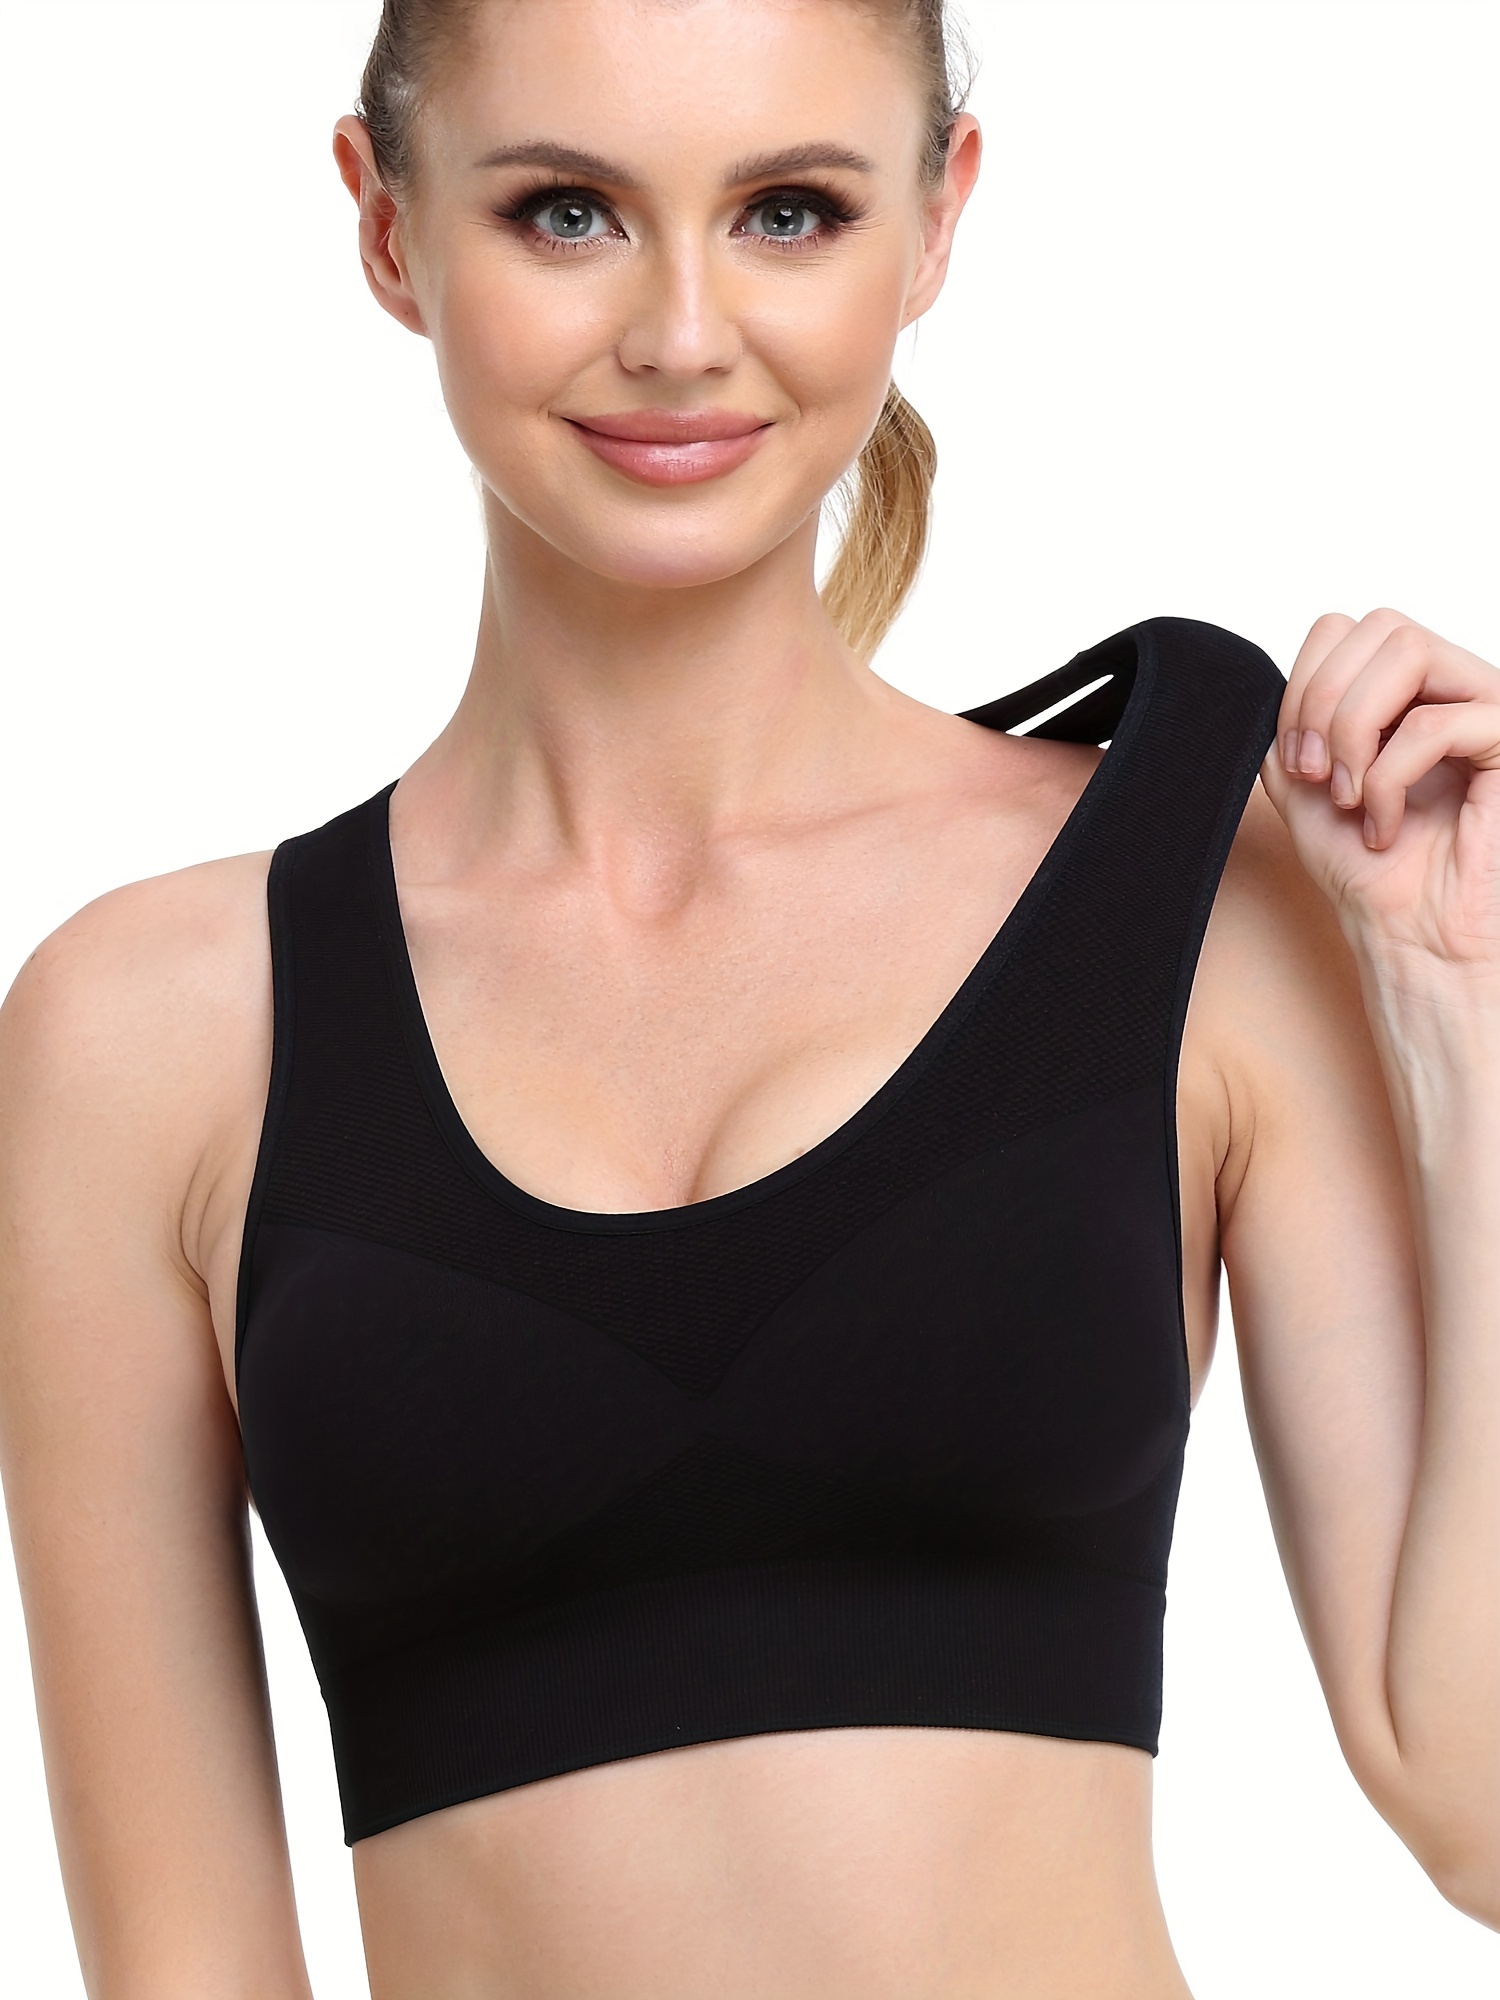 30% OFF on TWO DOTS Dual Support Padded Sports Bra for Gym Yoga Dancing  Workout or Aerobic on